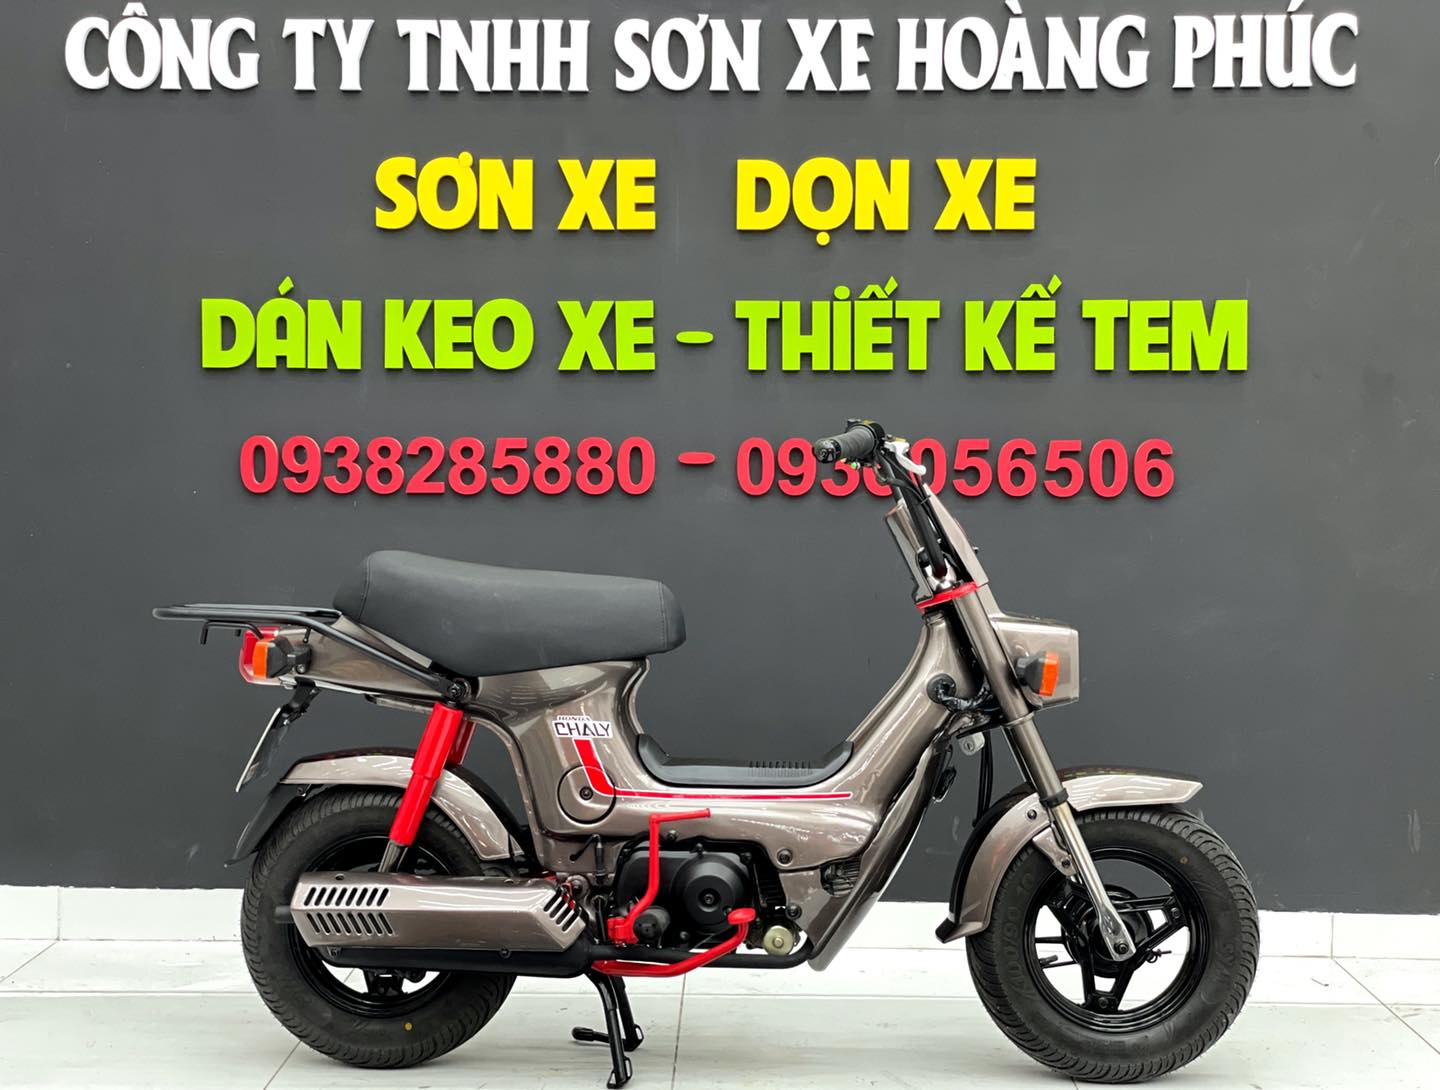 quy trinh son xe chaly